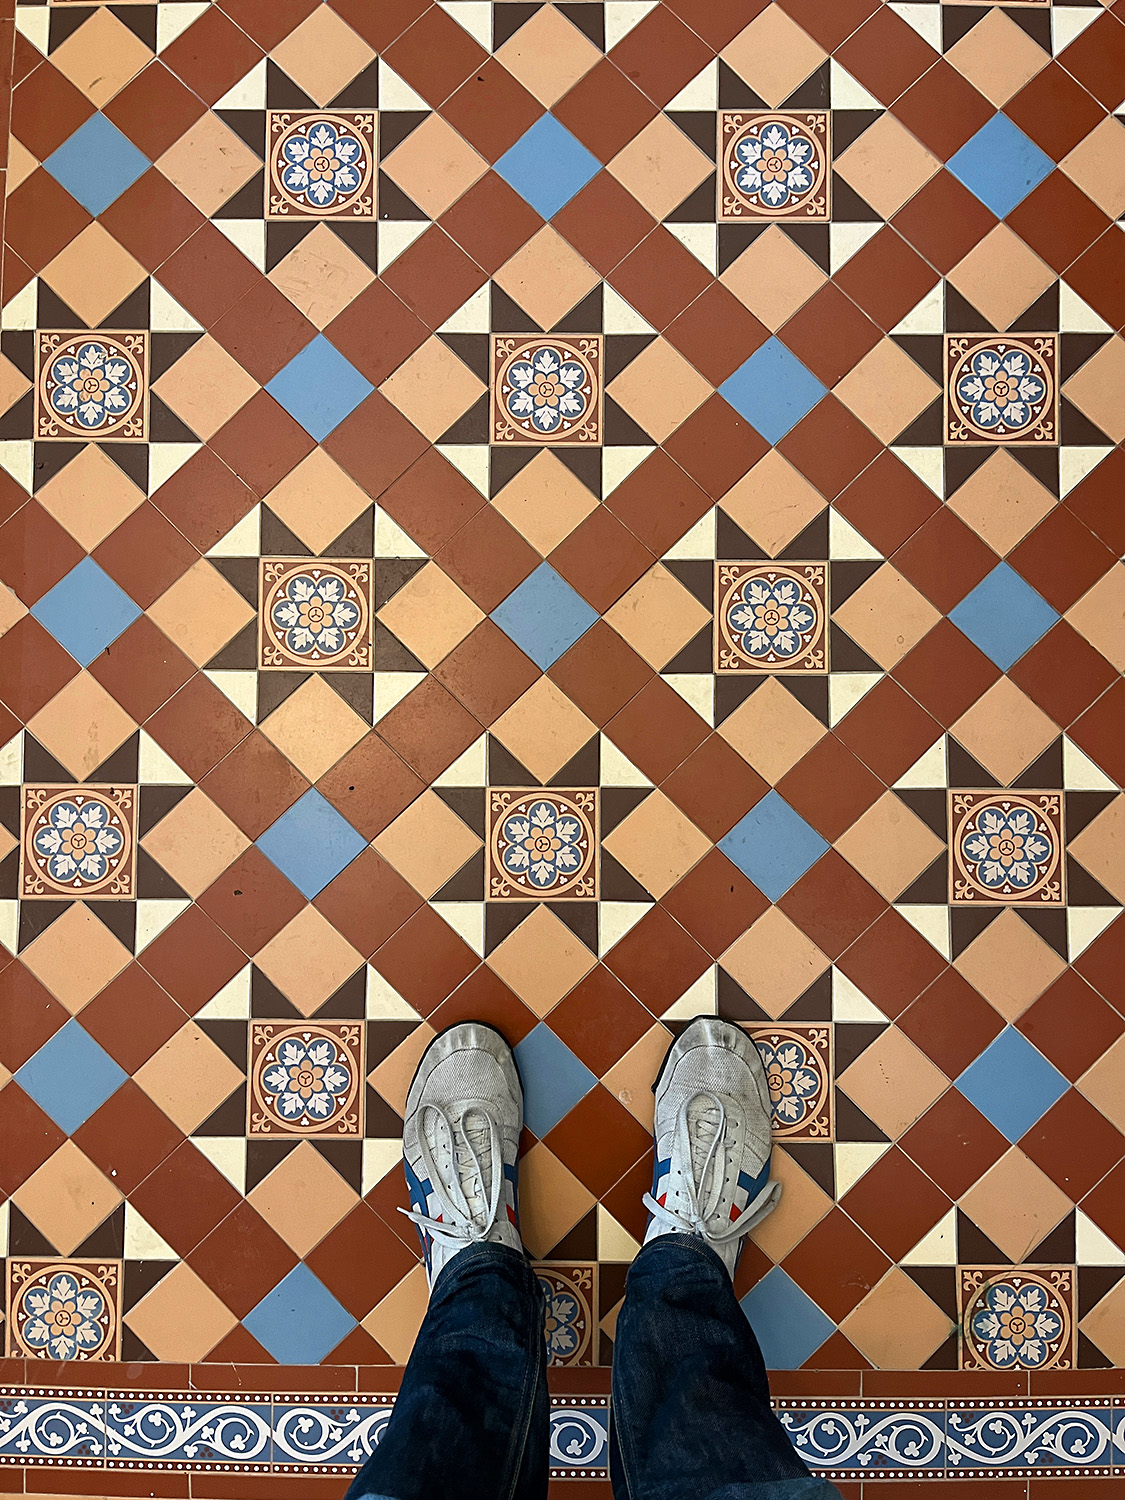 Original tile floors in the entryway of the admin building.